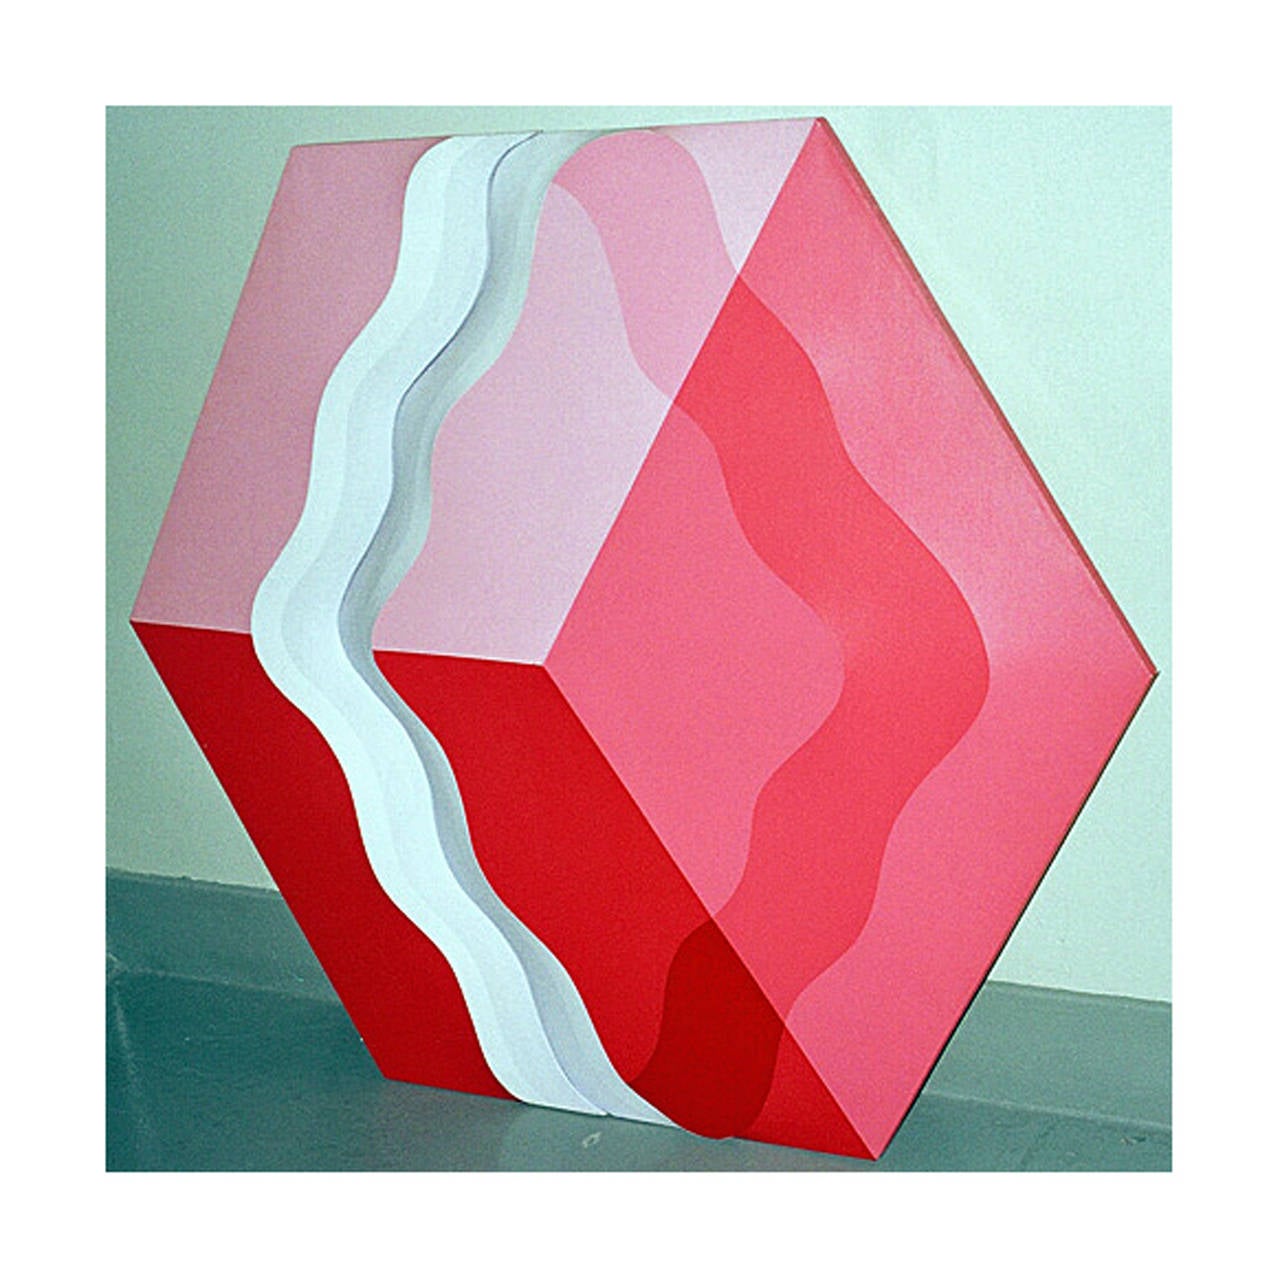 A fantastic three-dimensional shaped acrylic on canvas by noted Japanese-American artist Shozo Nagano titled, 